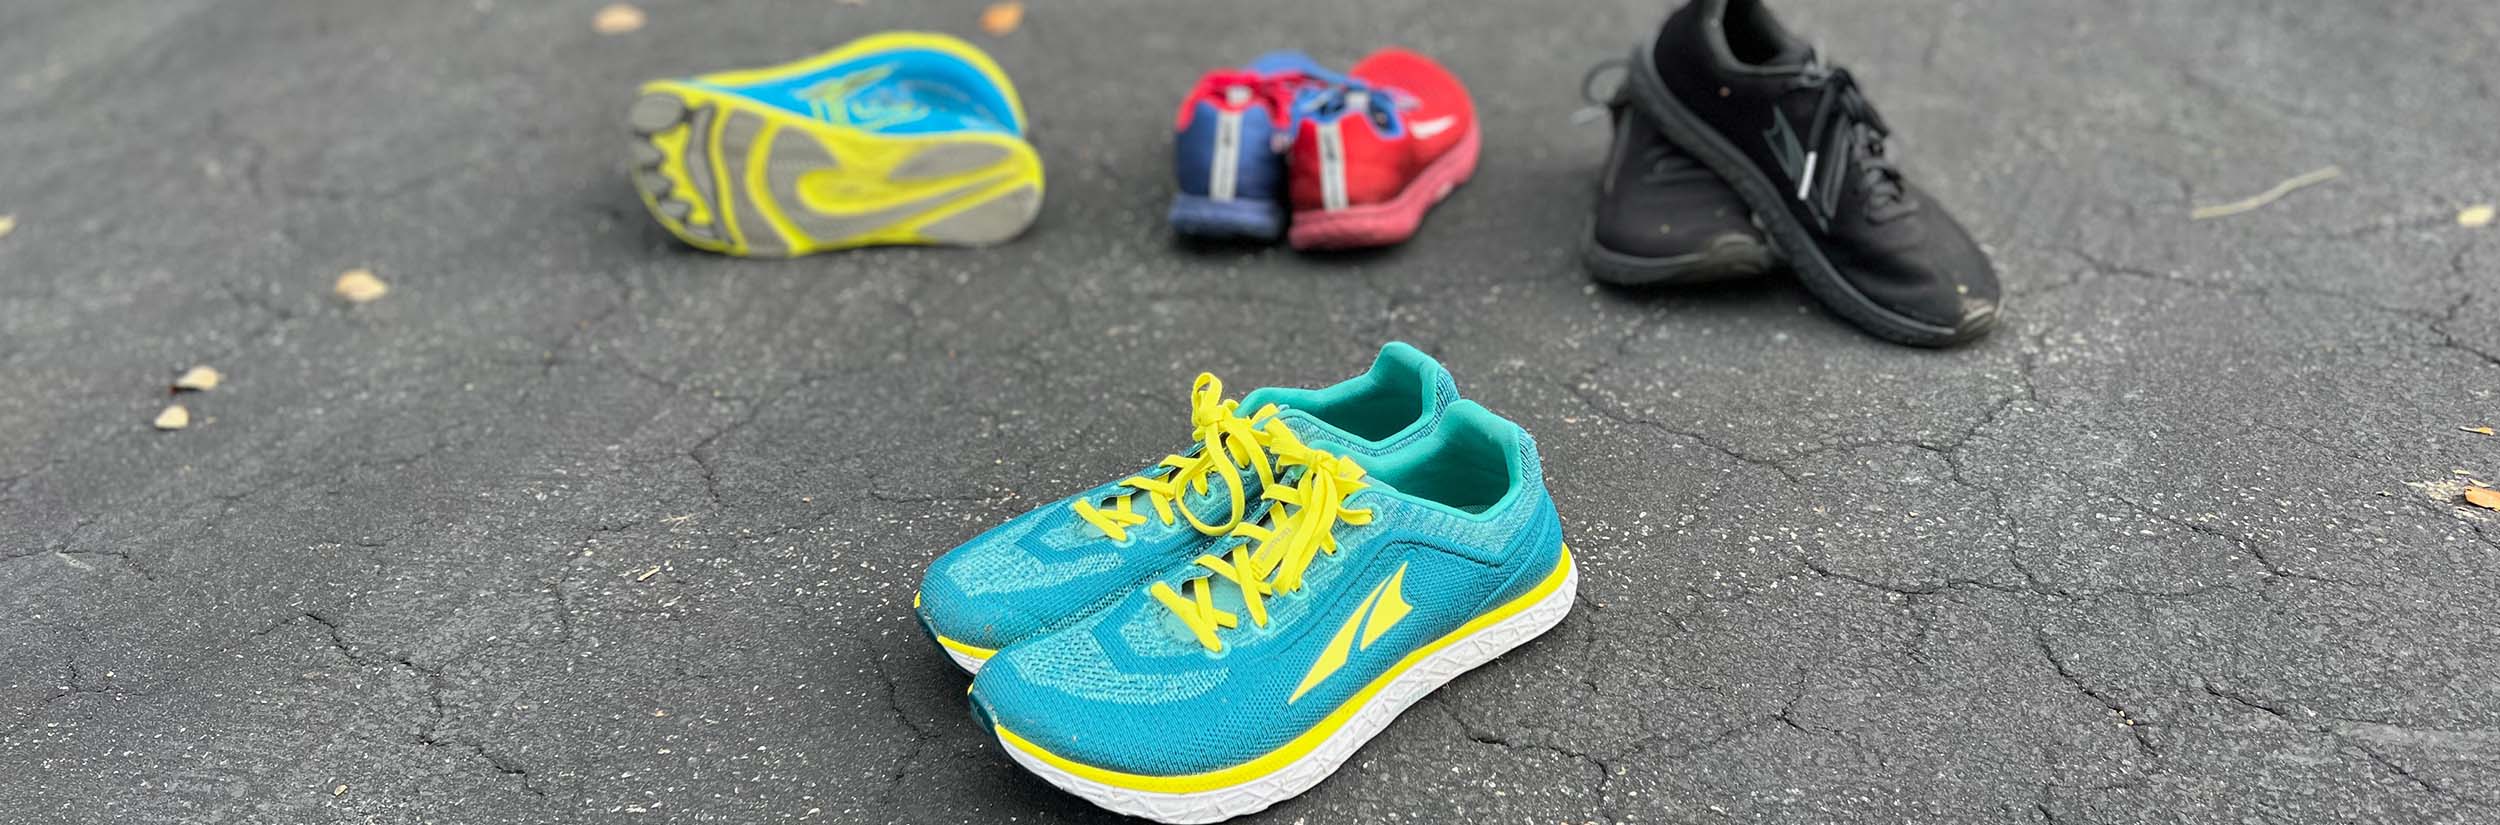 11 Best Running Shoes For Overpronation, According To Run Coaches ...